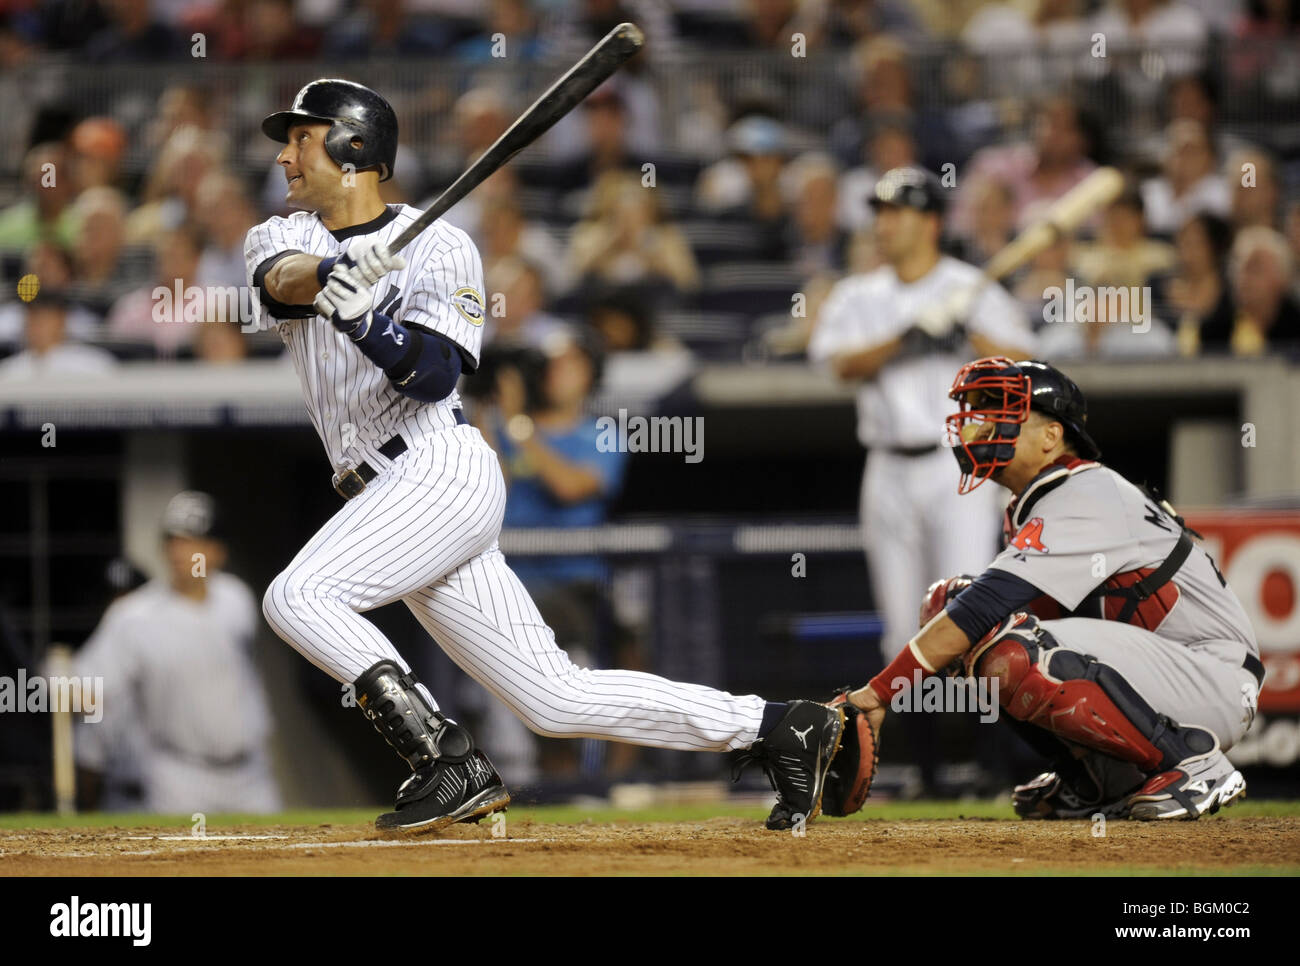 Derek Jeter #2 of the New York Yankees at bat during the game against the Boston  Red Sox at Yankee Stadium on August 6, 2009 Stock Photo - Alamy